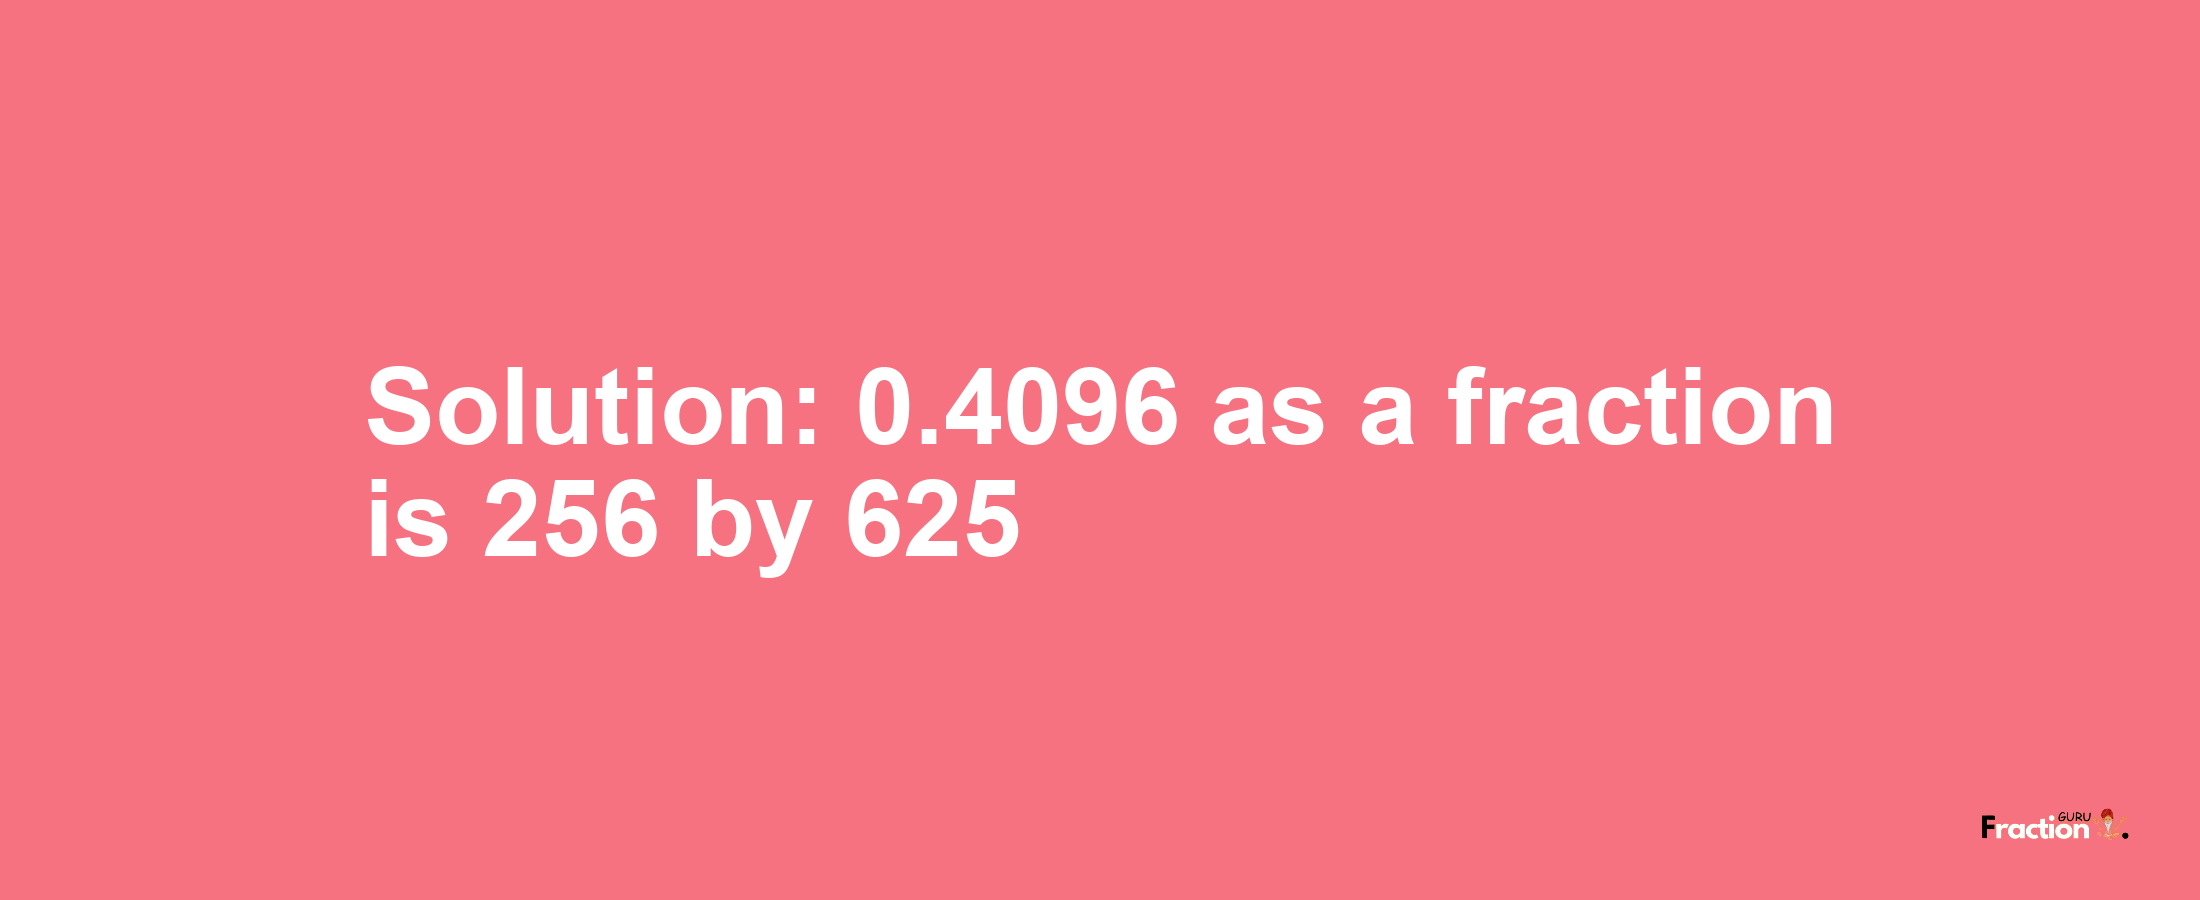 Solution:0.4096 as a fraction is 256/625